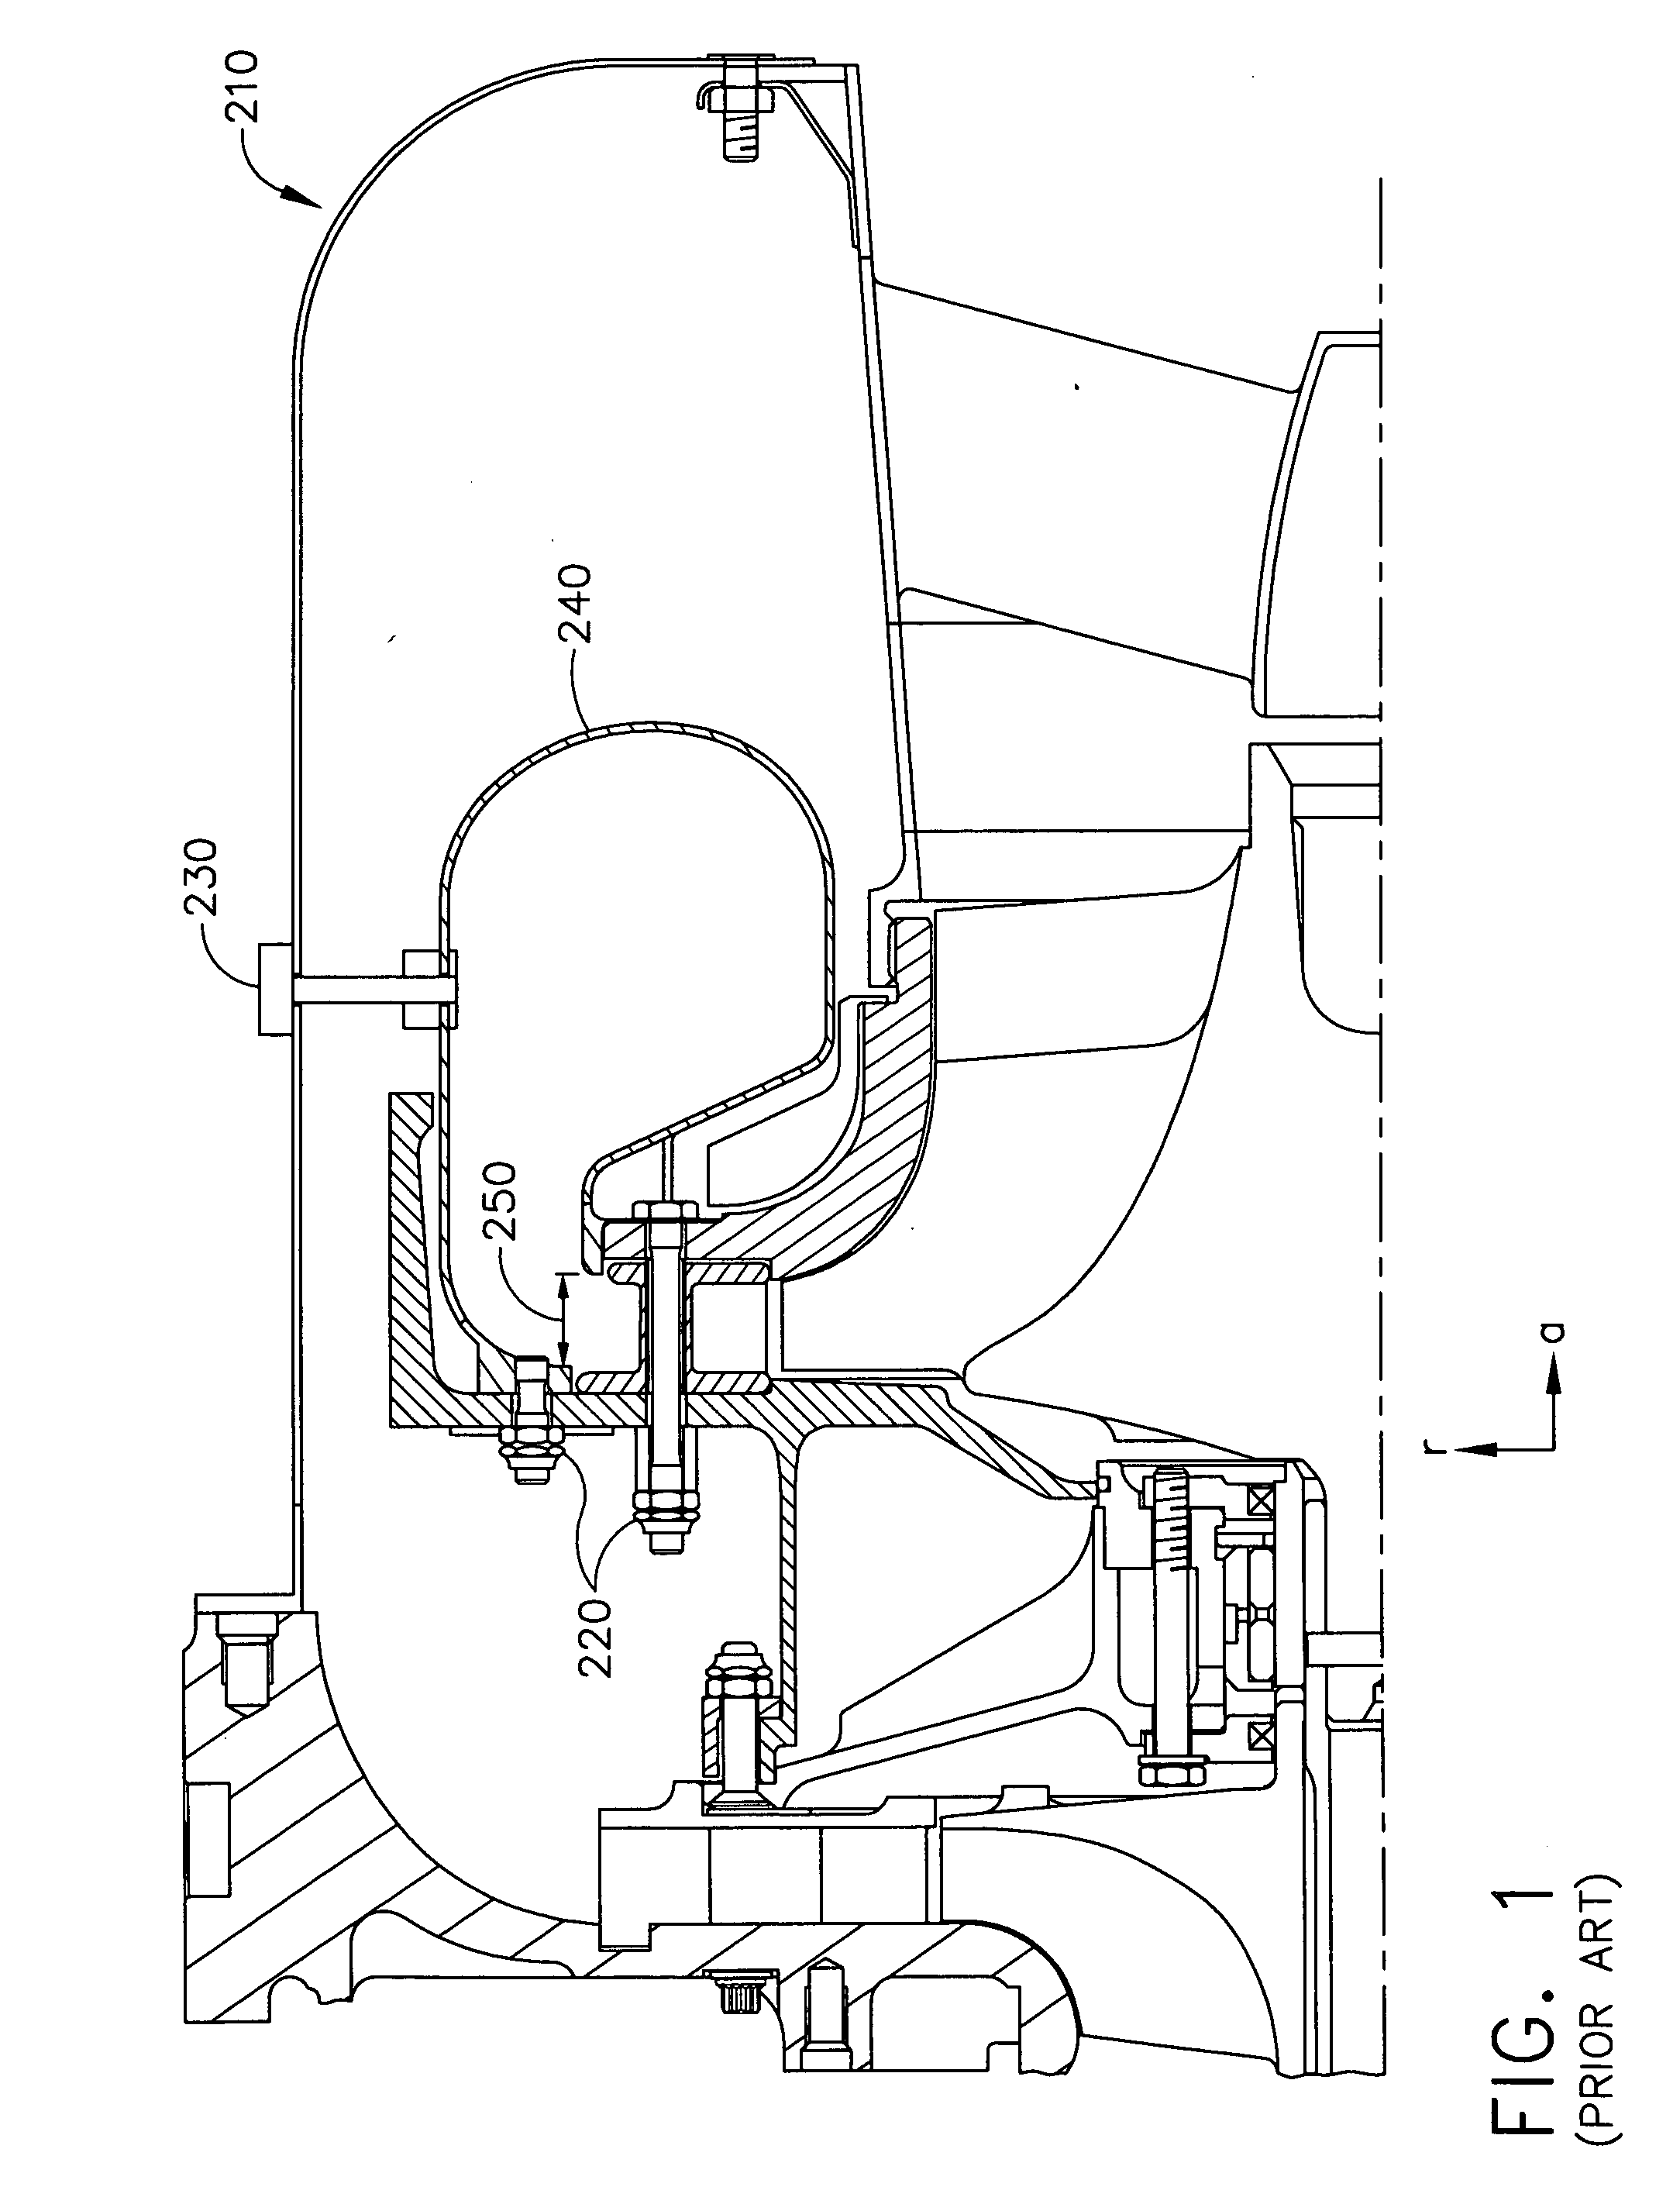 Multi-action on multi-surface seal with turbine scroll retention method in gas turbine engine